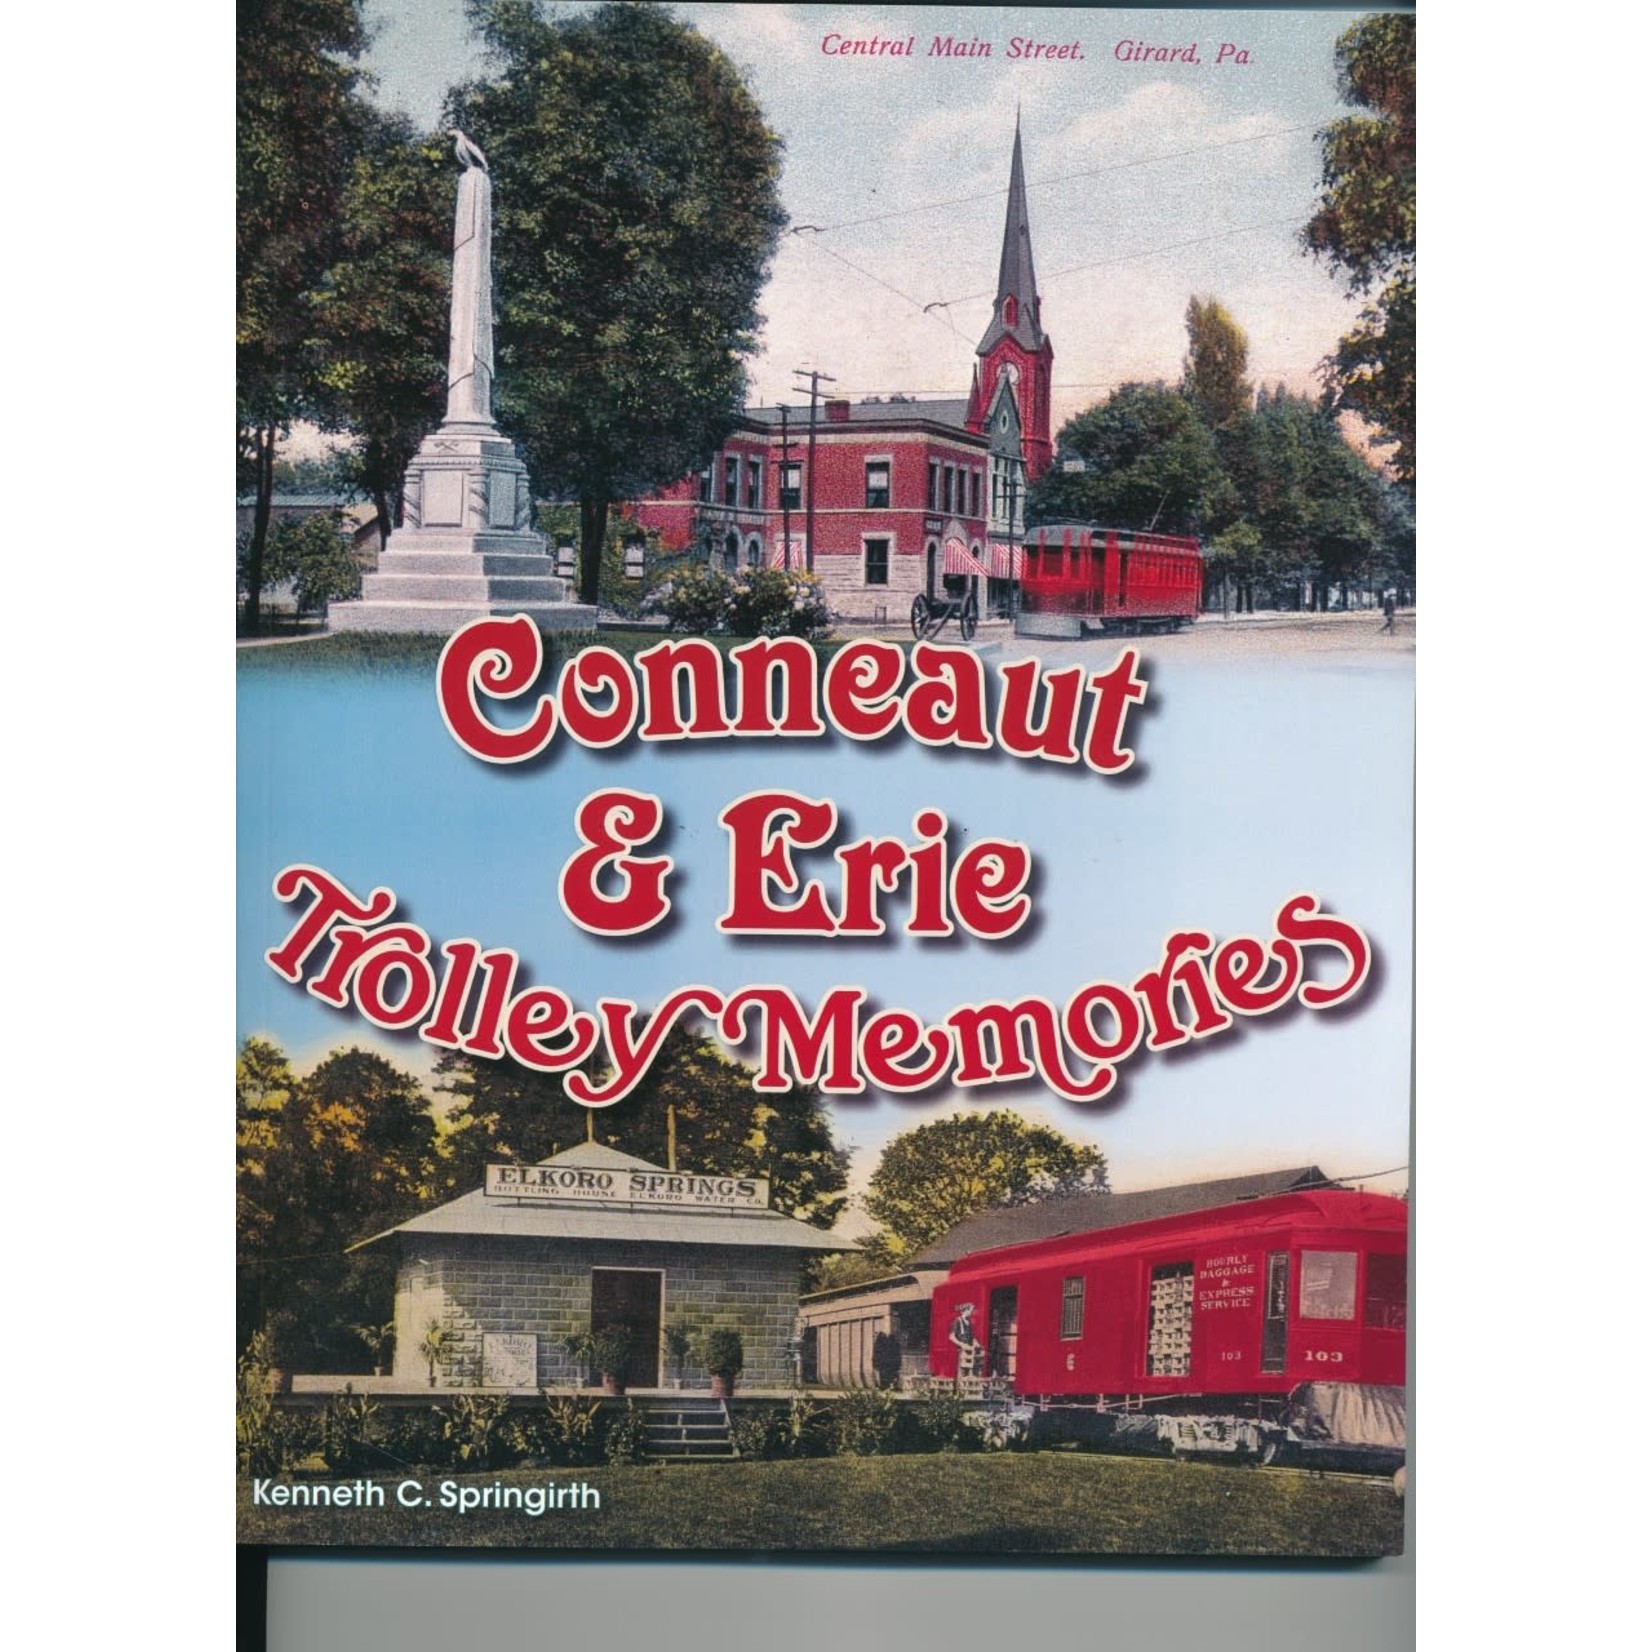 America Through Time Conneaut & Erie Trolley Memories *SIGNED